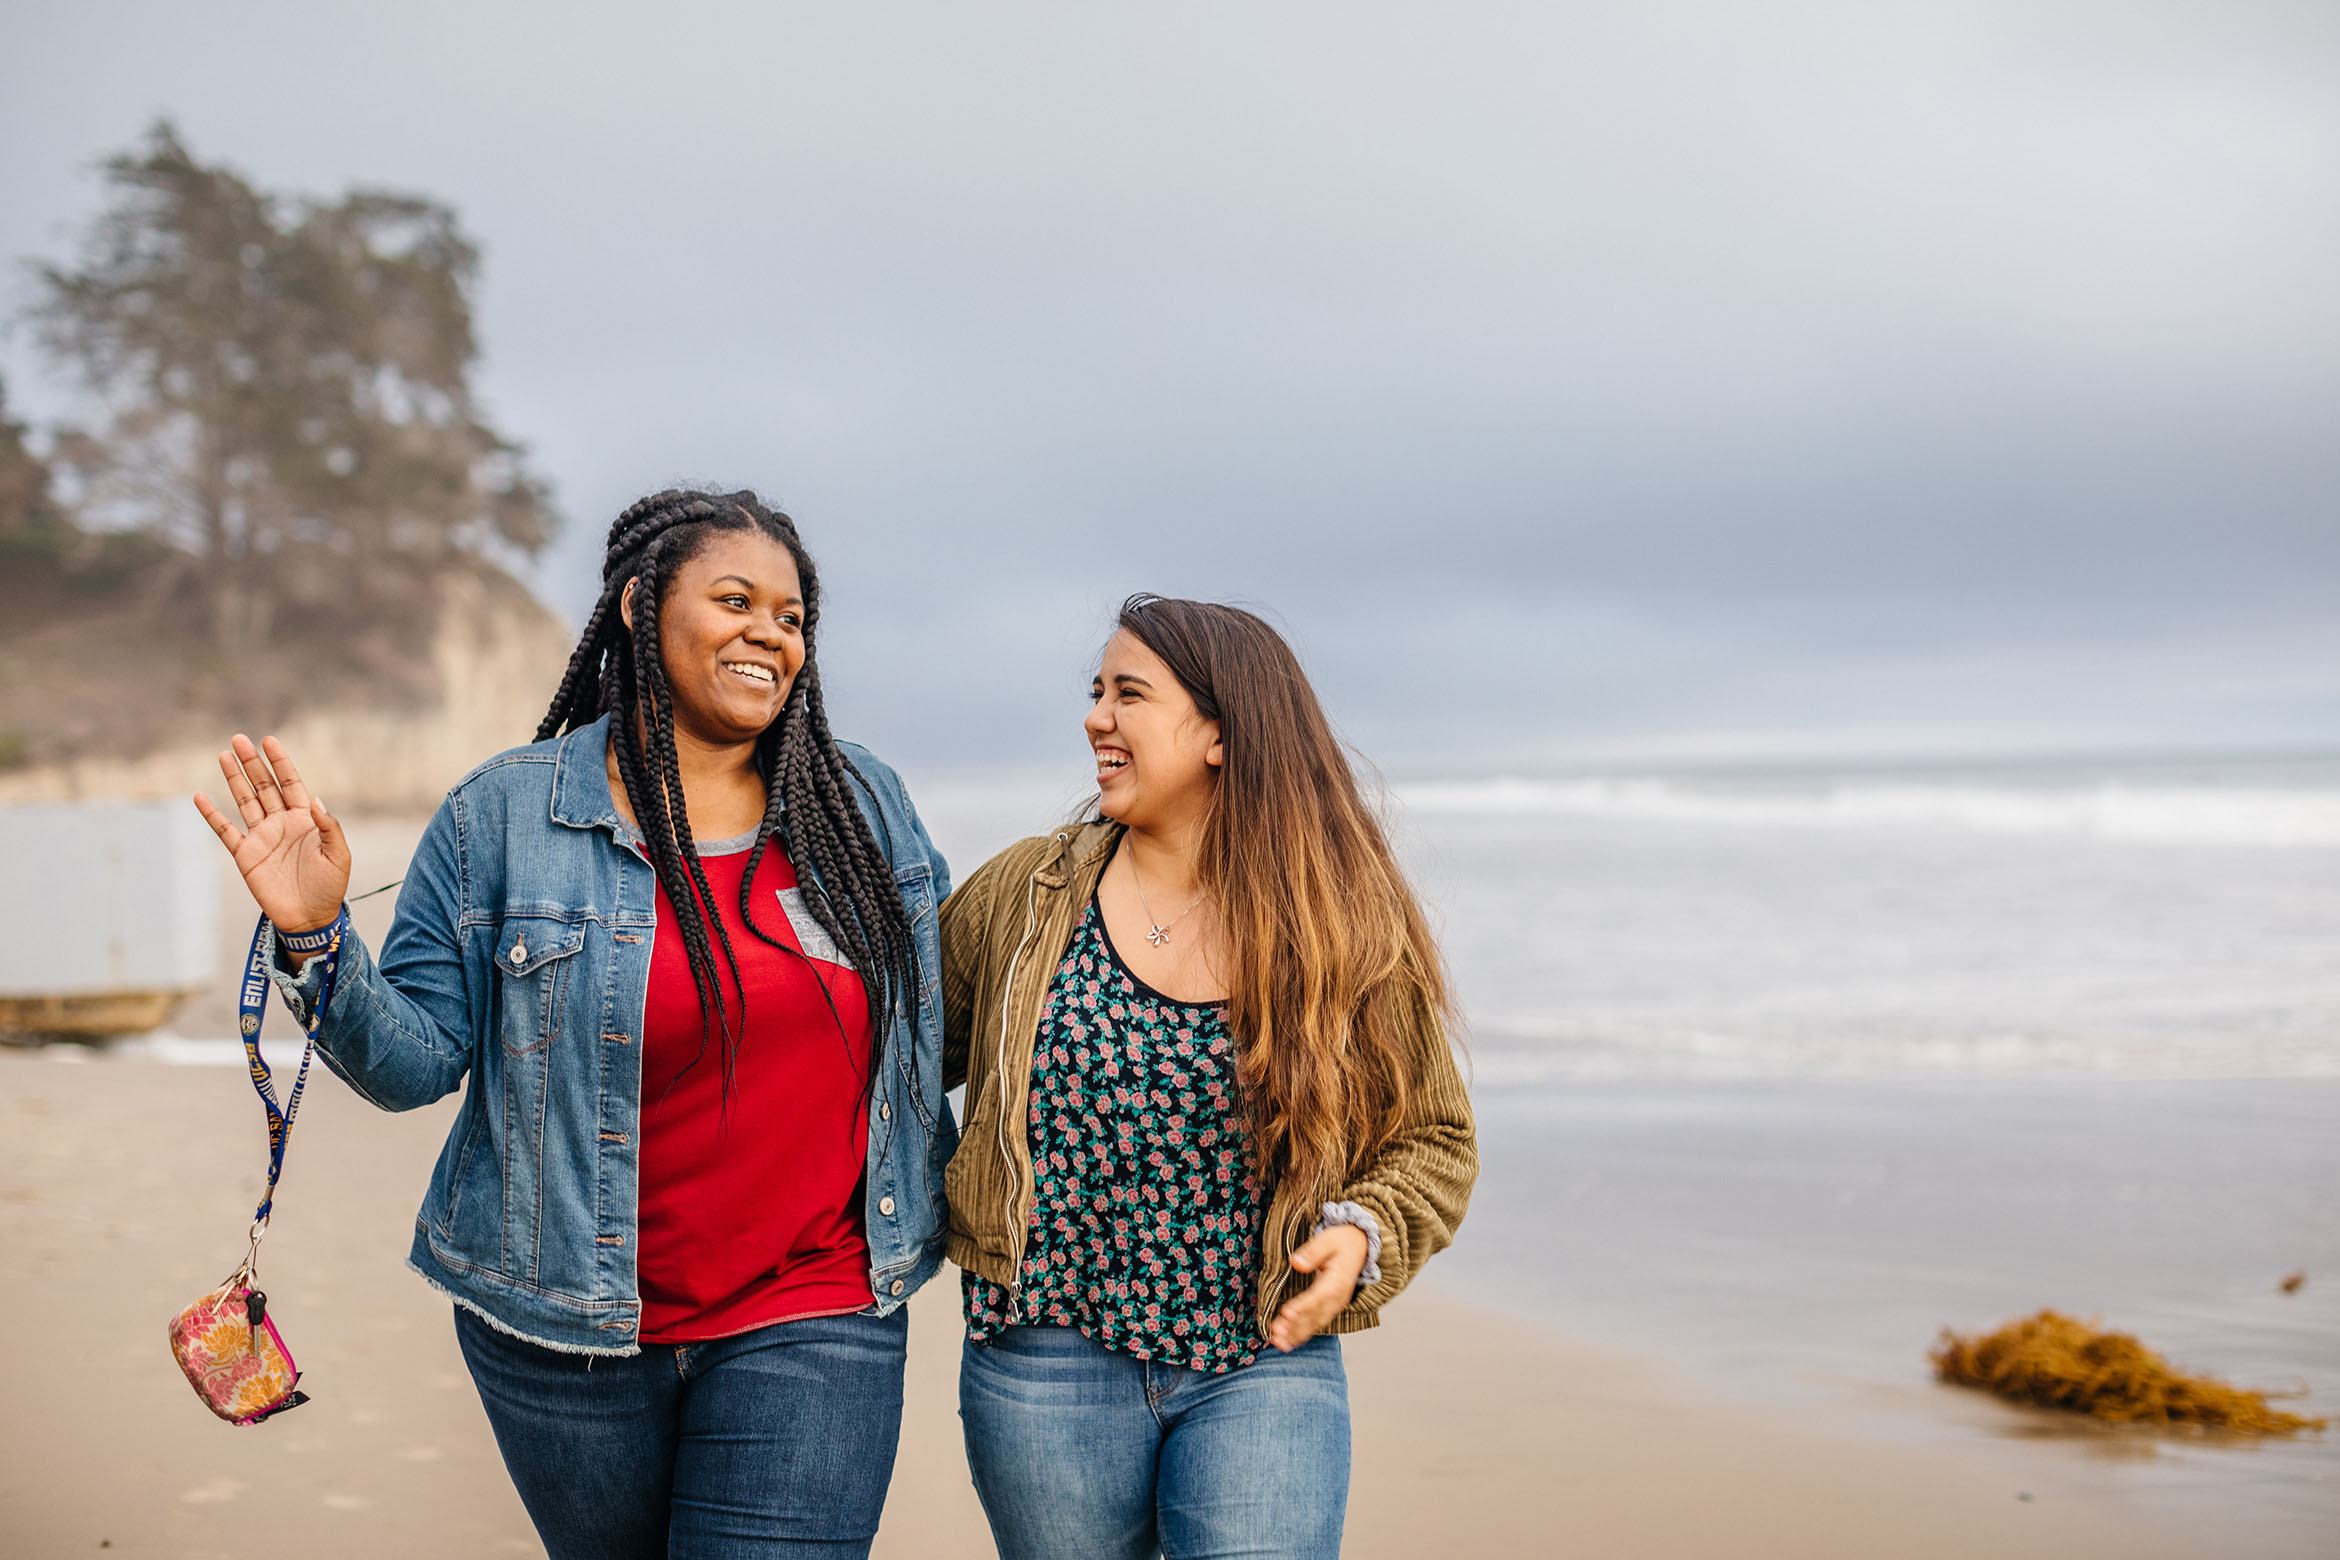 This is an image of two students chatting and walking on the beach.